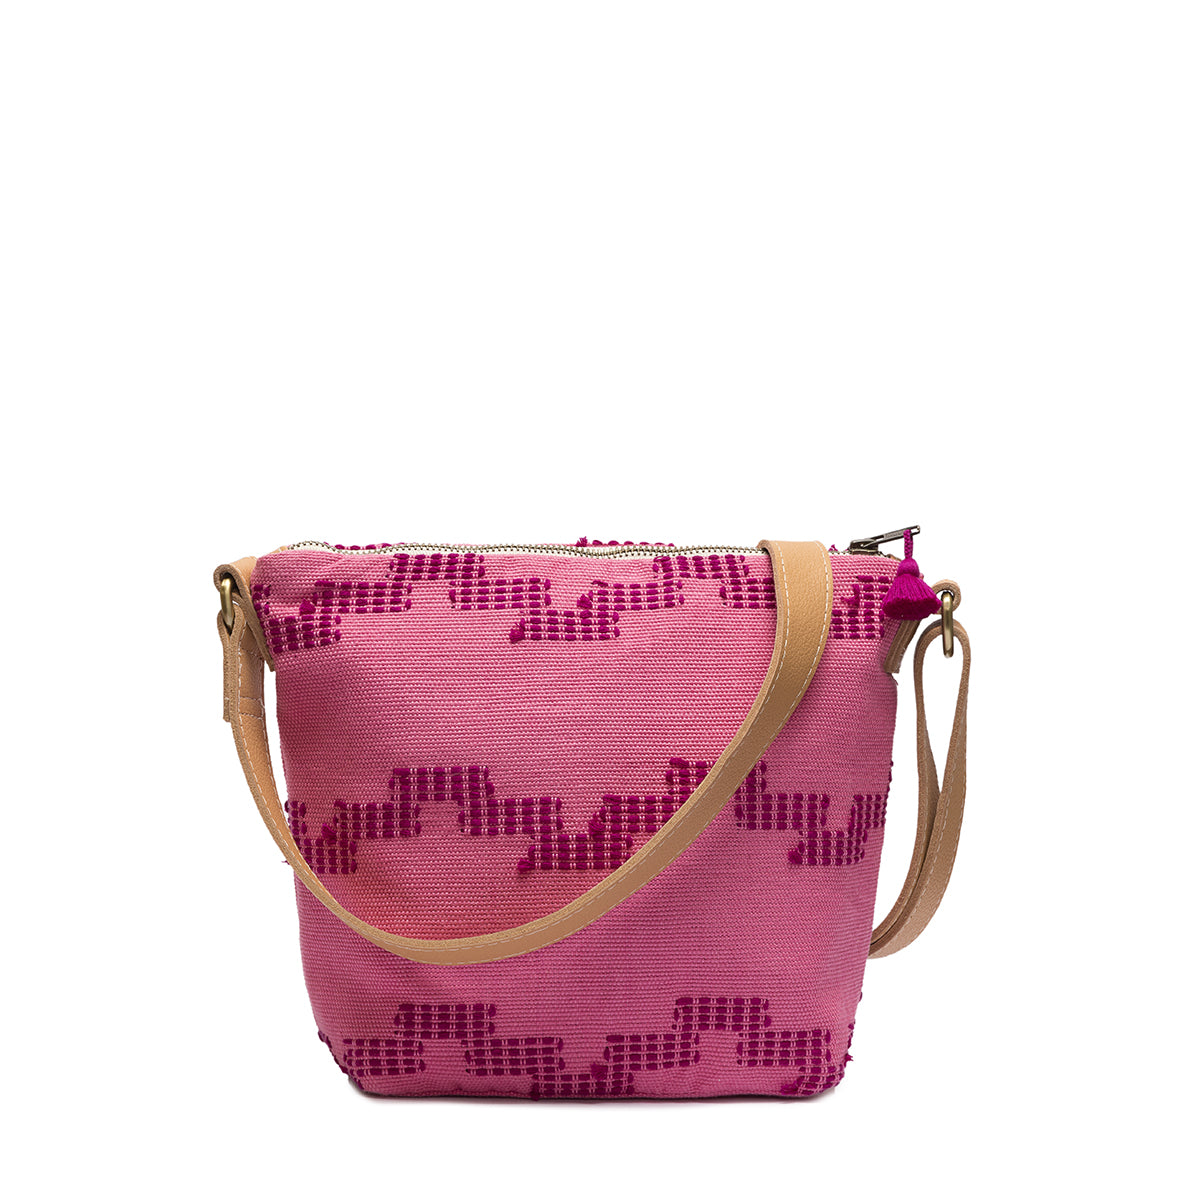 Artisan Mini Lidia Handwoven Crossbody in Pitaya style. The Pitaya pattern has a pink background with geometric wavy stripes. It has a leather crossbody strap and a dark pink tassel detail.